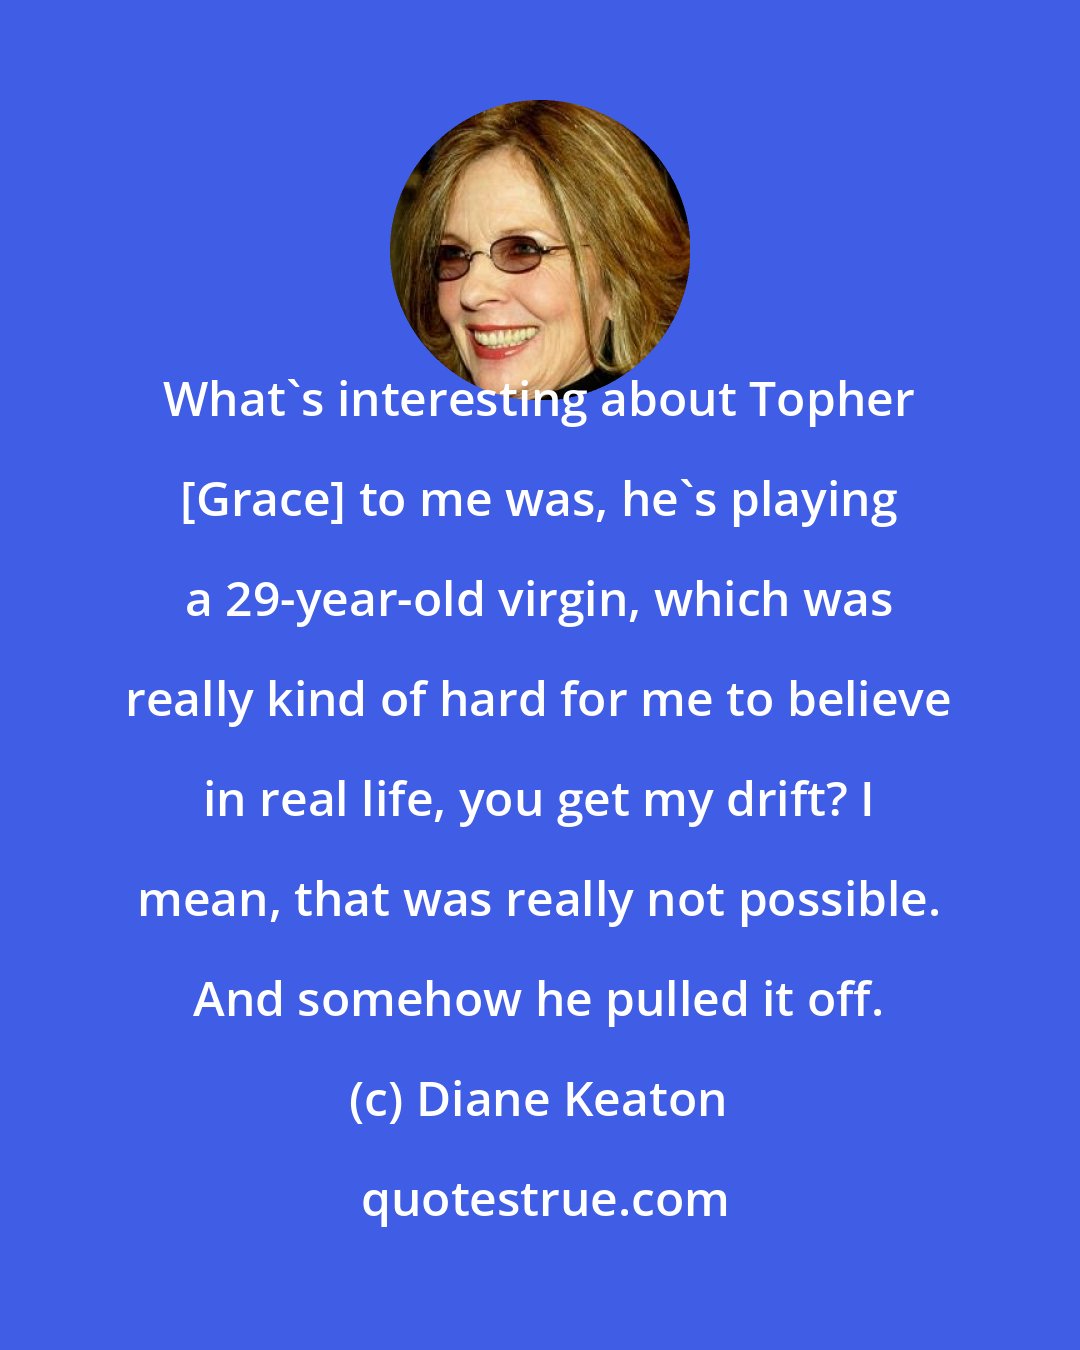 Diane Keaton: What's interesting about Topher [Grace] to me was, he's playing a 29-year-old virgin, which was really kind of hard for me to believe in real life, you get my drift? I mean, that was really not possible. And somehow he pulled it off.